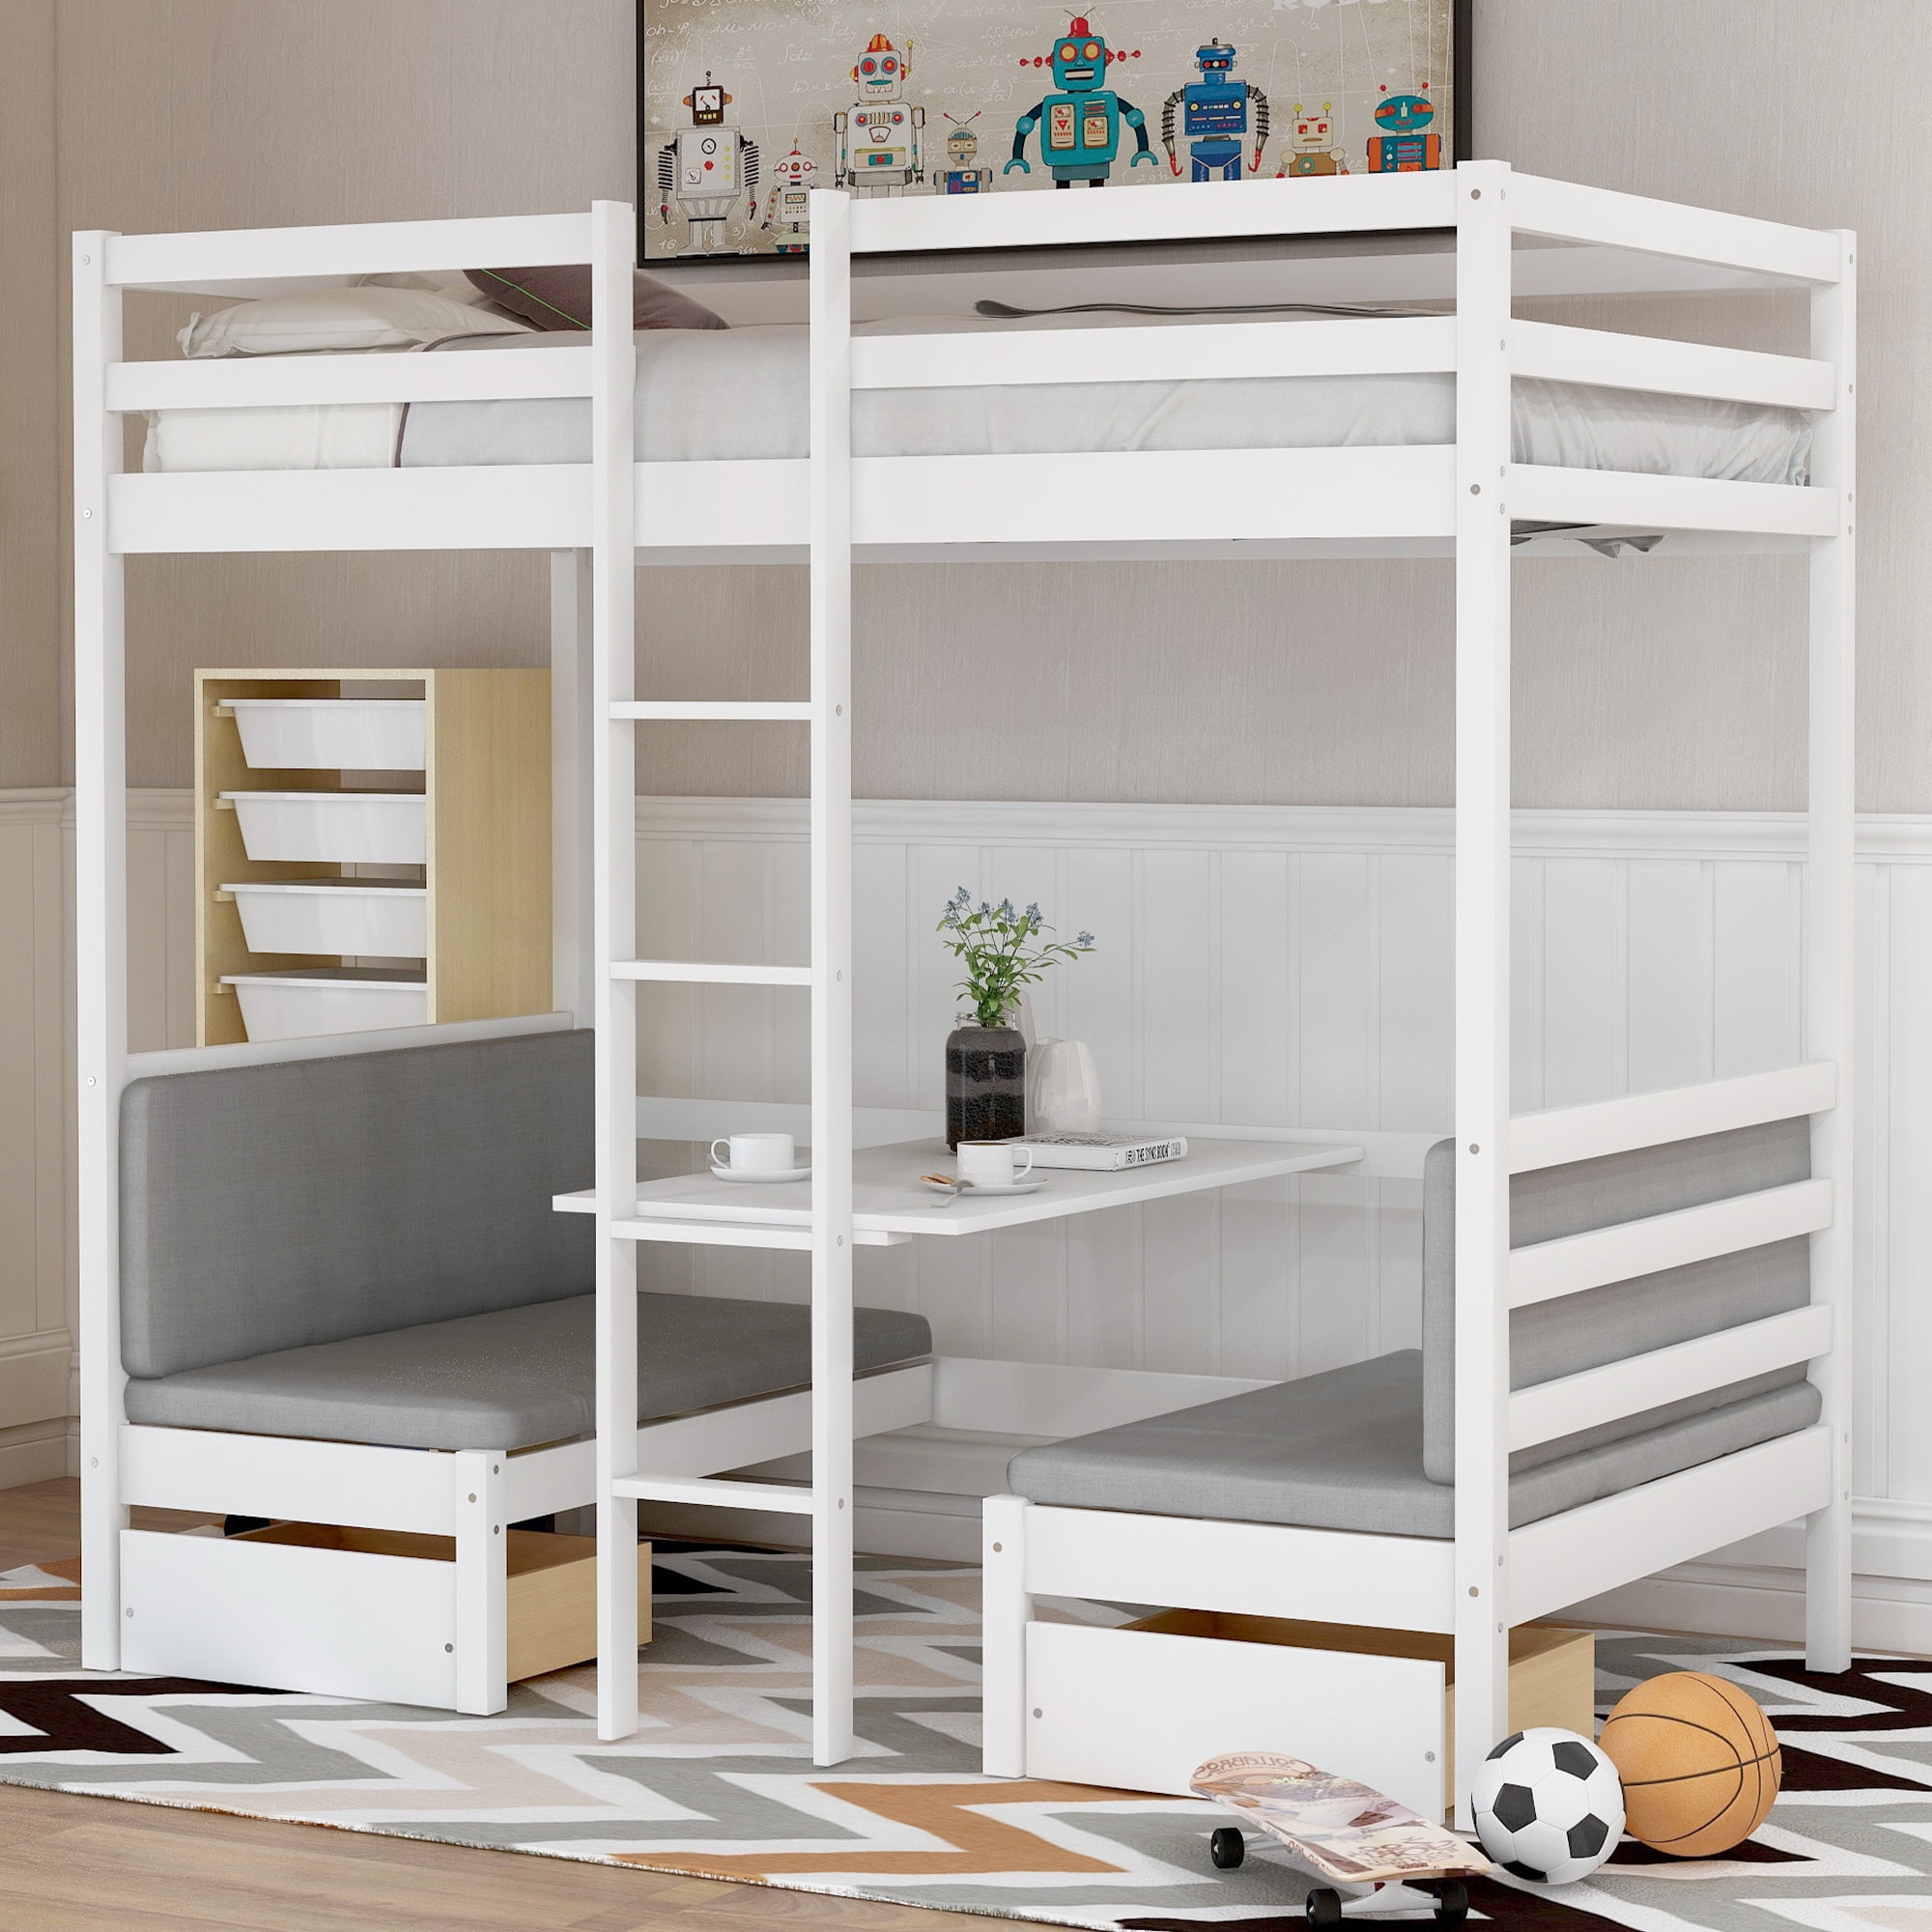 Euroco Solid Wood Convertible Twin Bunk, 2 Bunk Beds With Desk